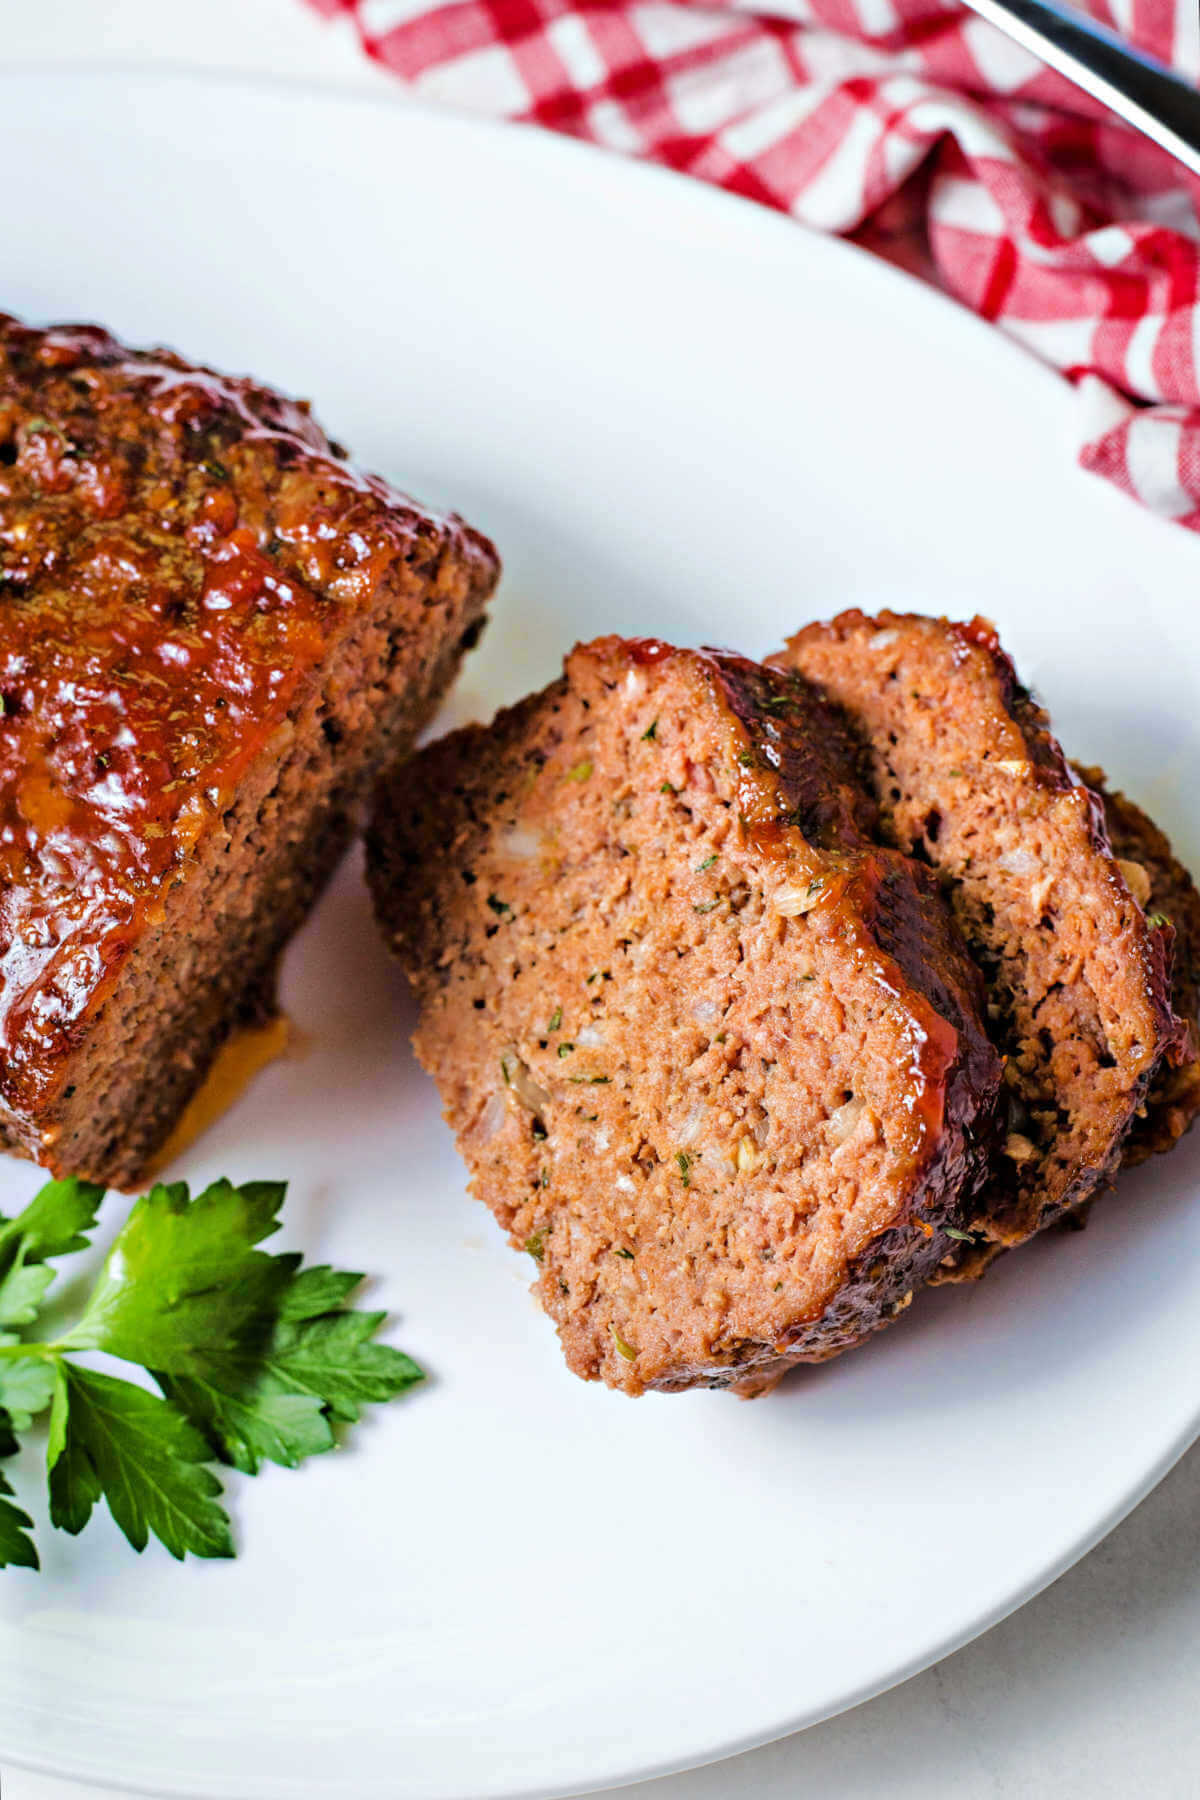 two slices of smoked meatloaf on a plate.